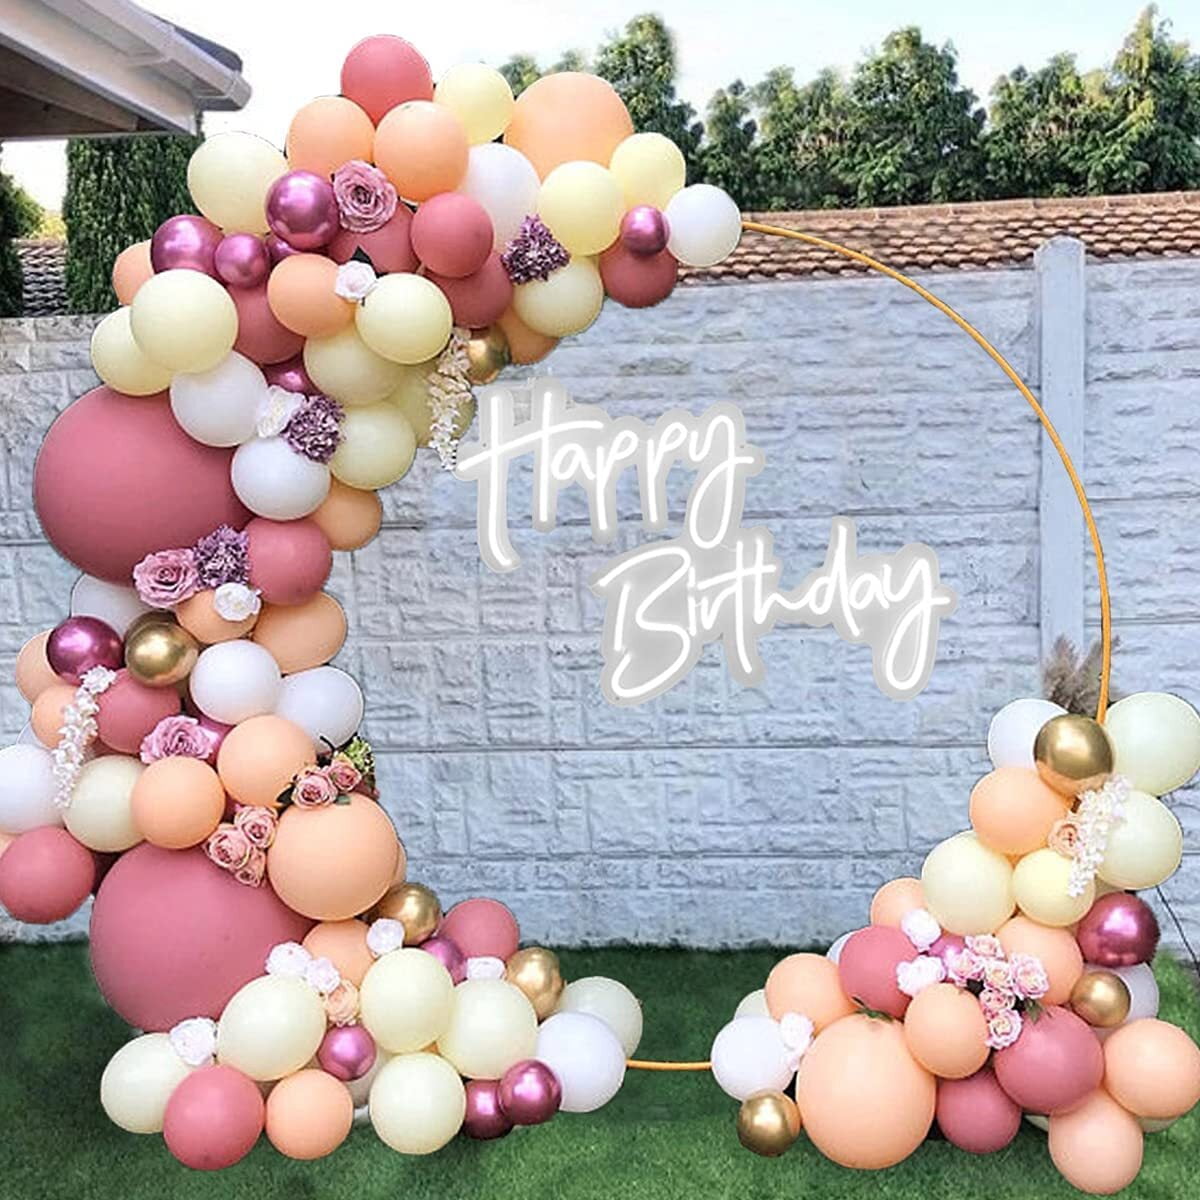 YANSION Balloon Arch Kit Retro Pink White Gold Party Decorations with Flowers Orange Yellow Balloons for Birthday Baby Shower Wedding Anniversary Background - Walmart.com